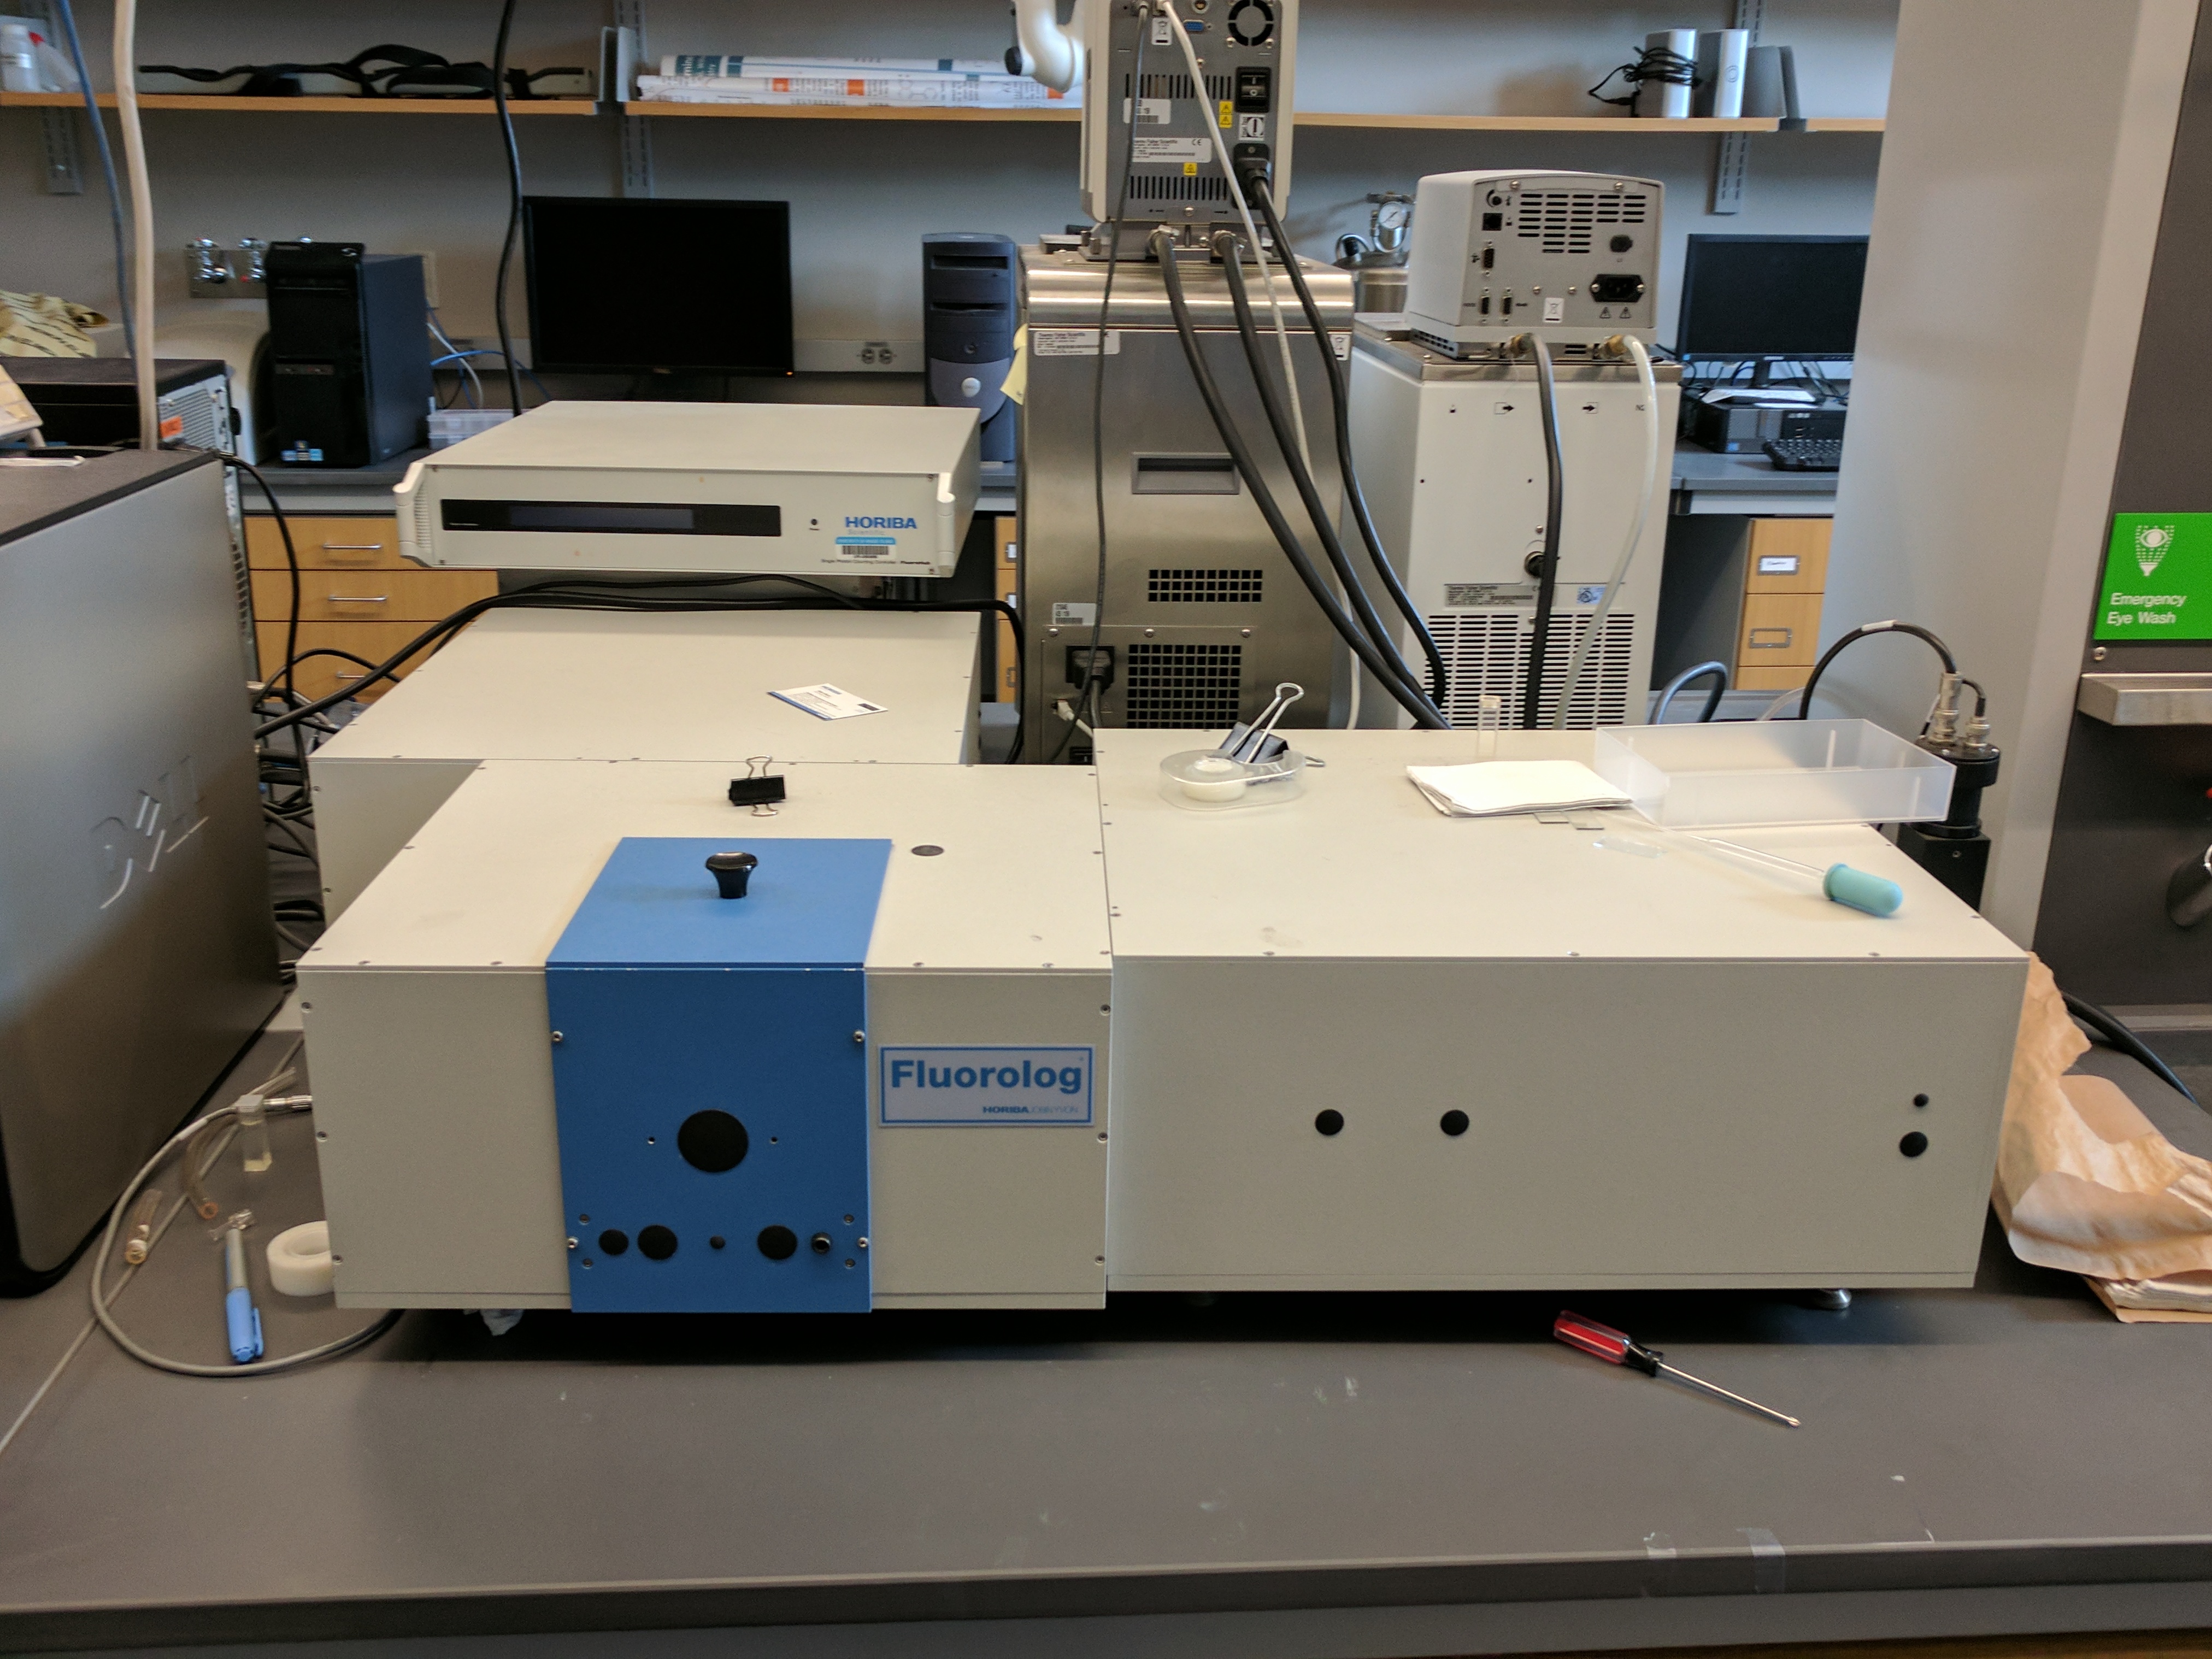 Horiba Fluorolog Spectrometer: The fluorescent instrument is our other workhorse. The spectrometer has a spectral range from 220 nm to 900 nm and spectral resolution of less than 0.5 nm. We use the instrument for both solutions and thin film characterization.